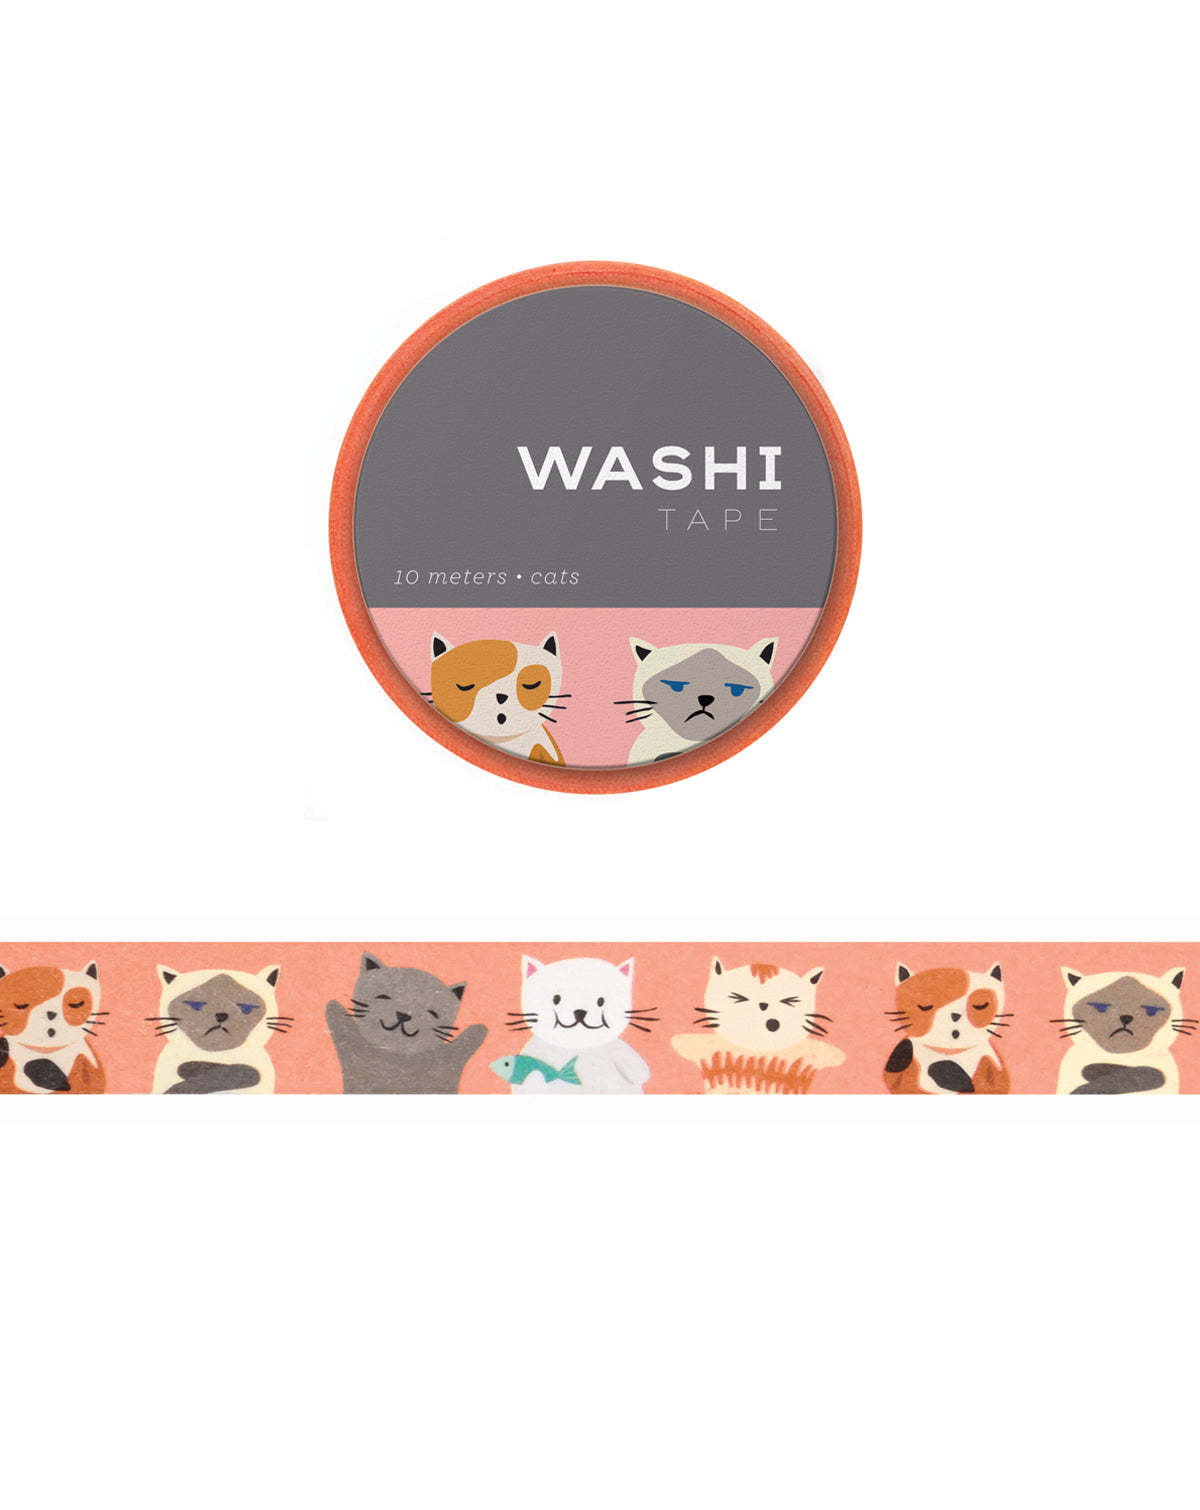 Cats Washi Tape | Girl of All Work Girl of All Work - Oscar & Libby's